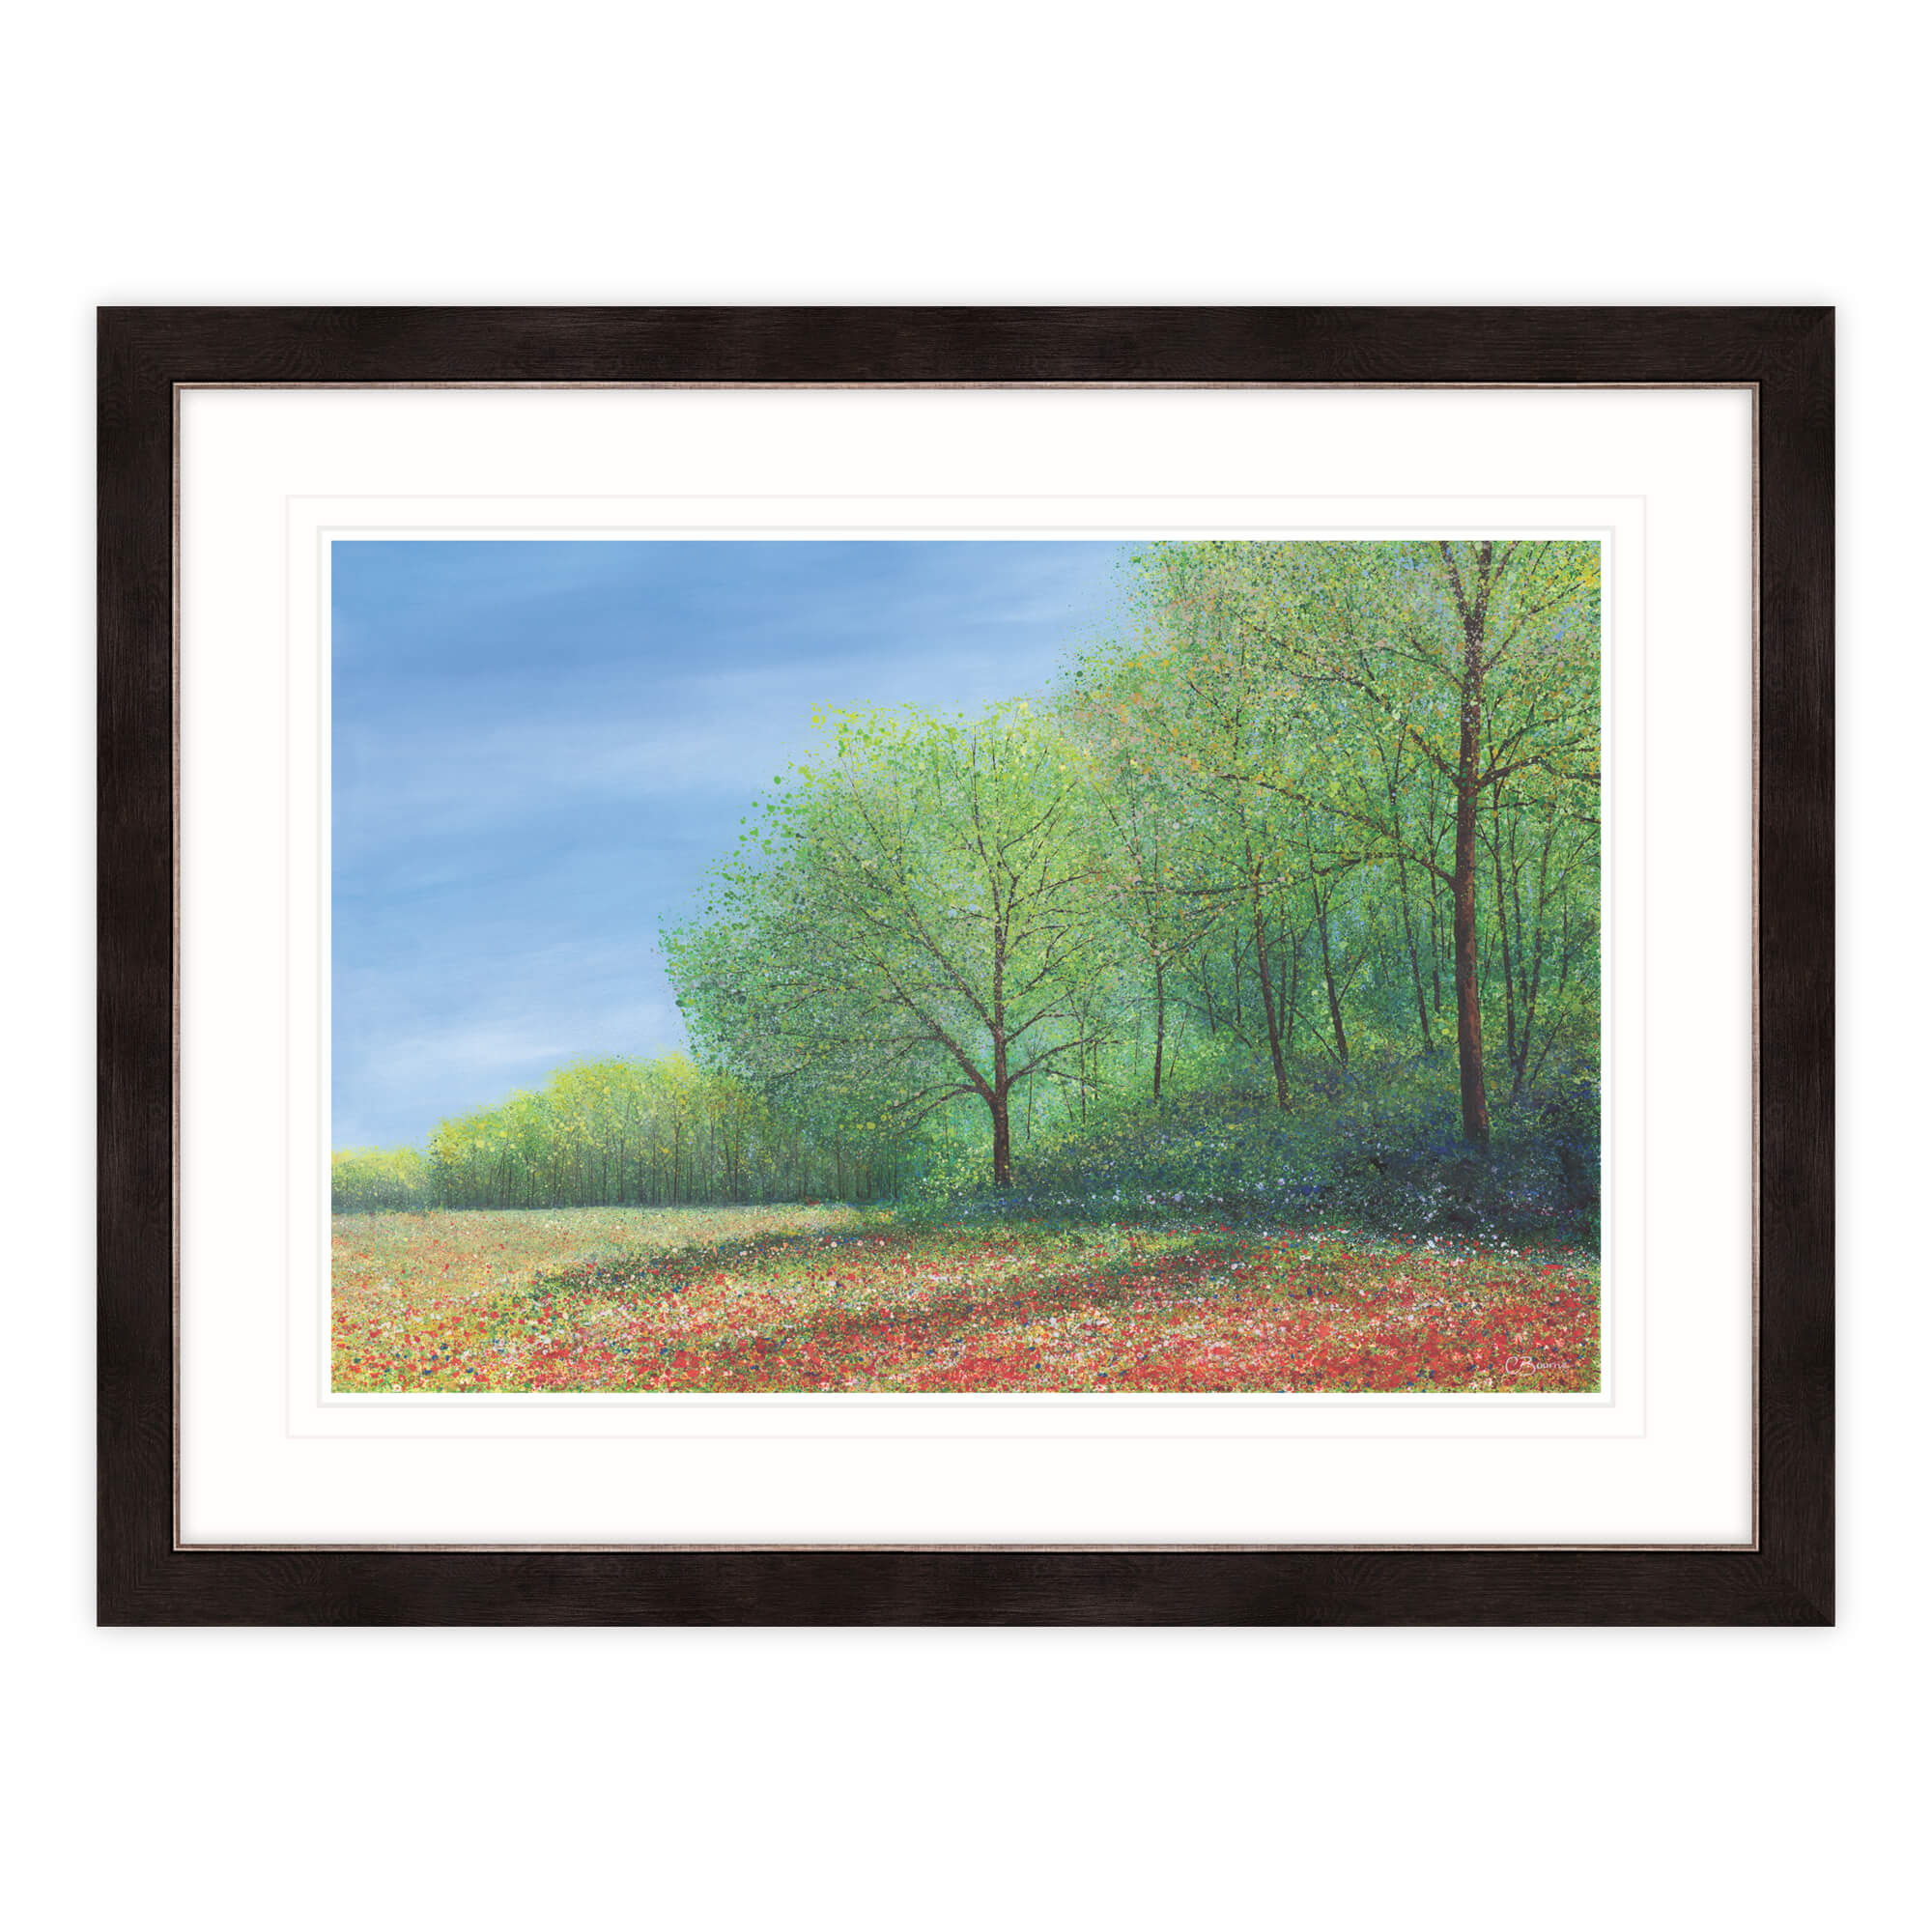 Summers Here Framed Print